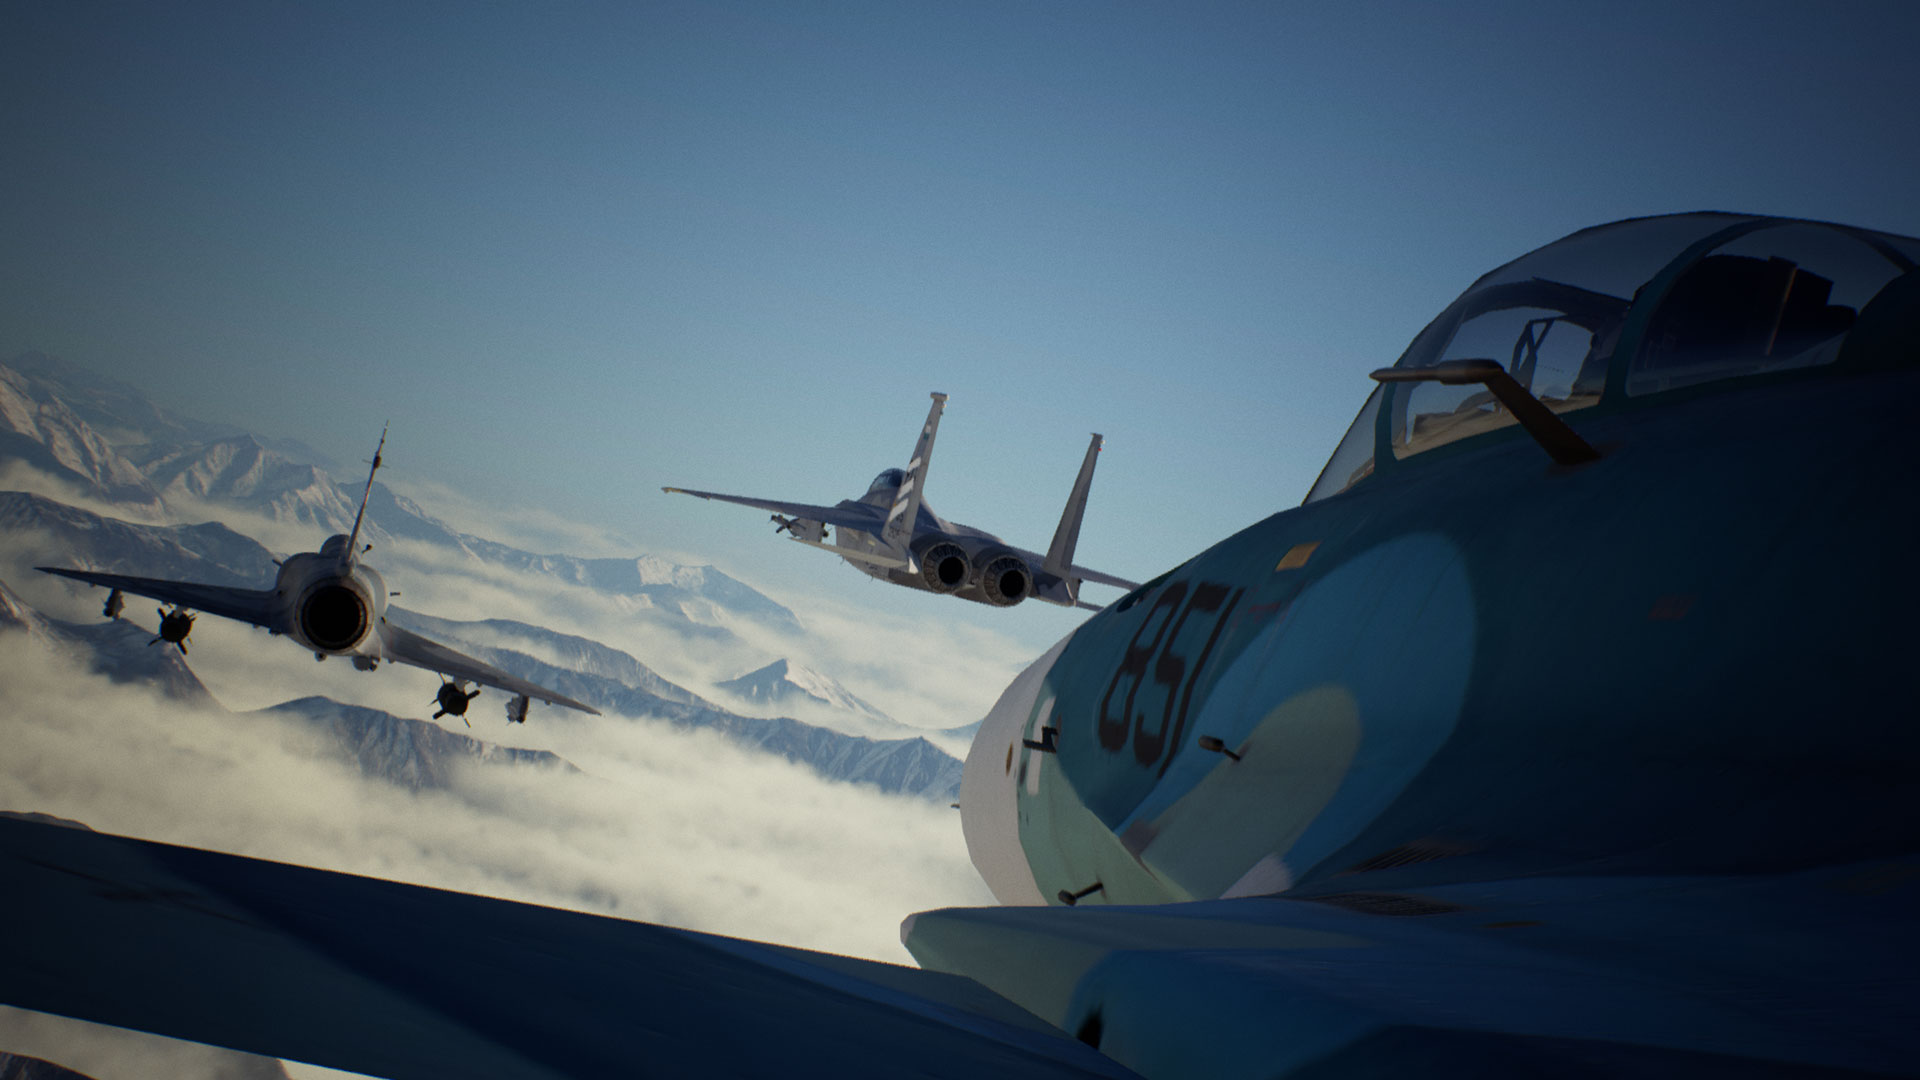 Ace Combat 7: Skies Unknown Review – Into the Wild Blue Yonder